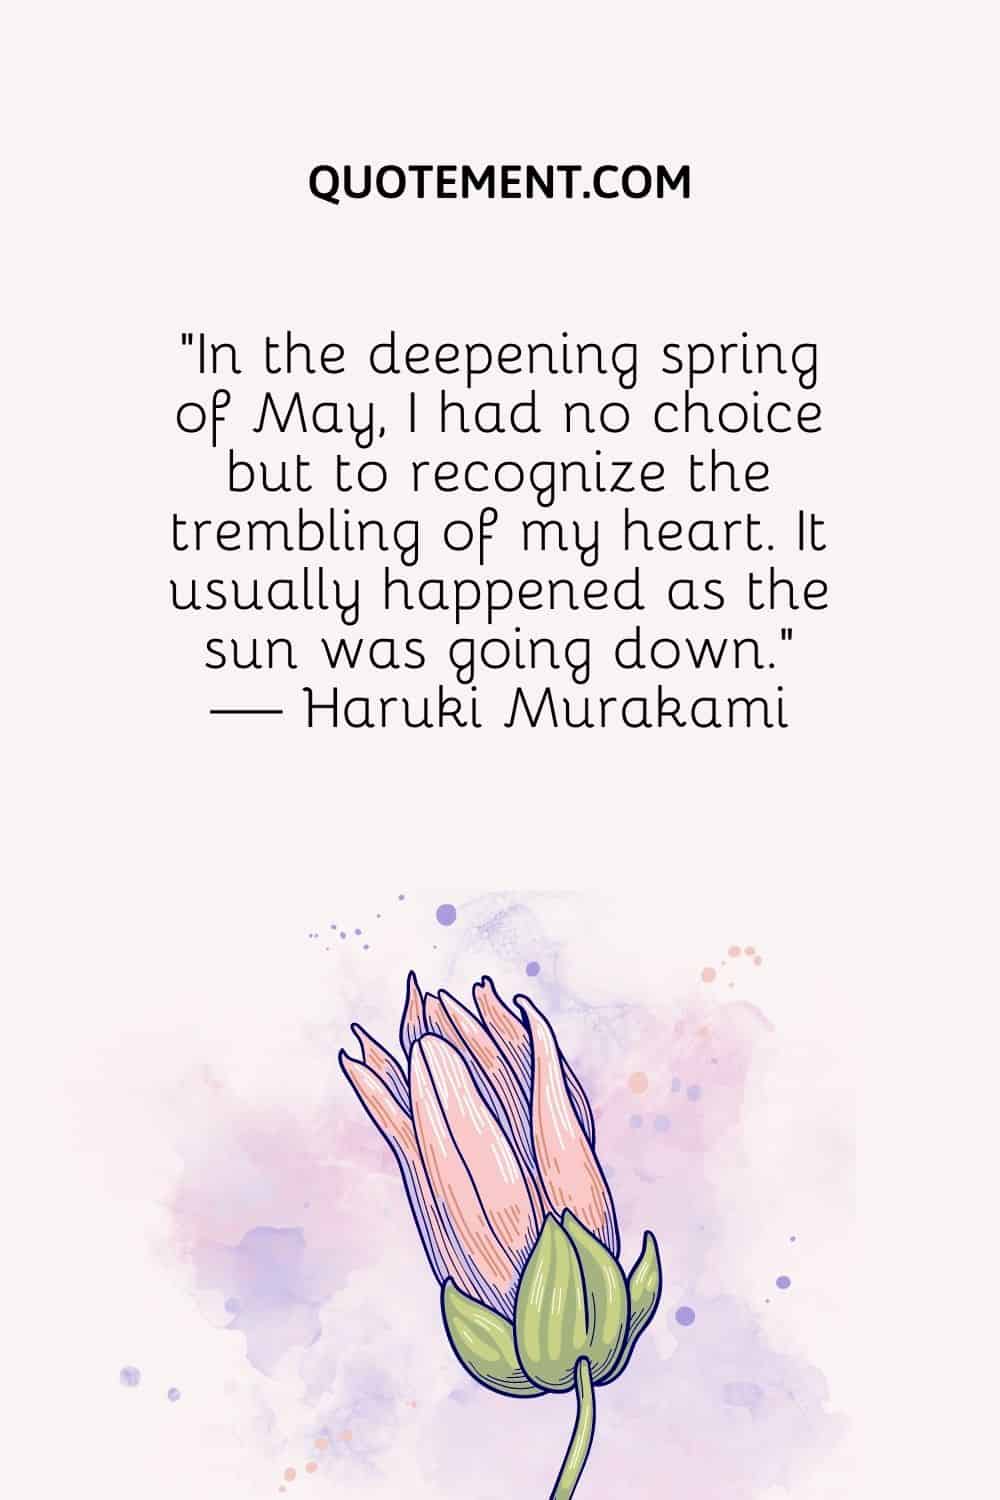 “In the deepening spring of May, I had no choice but to recognize the trembling of my heart. It usually happened as the sun was going down.” — Haruki Murakami